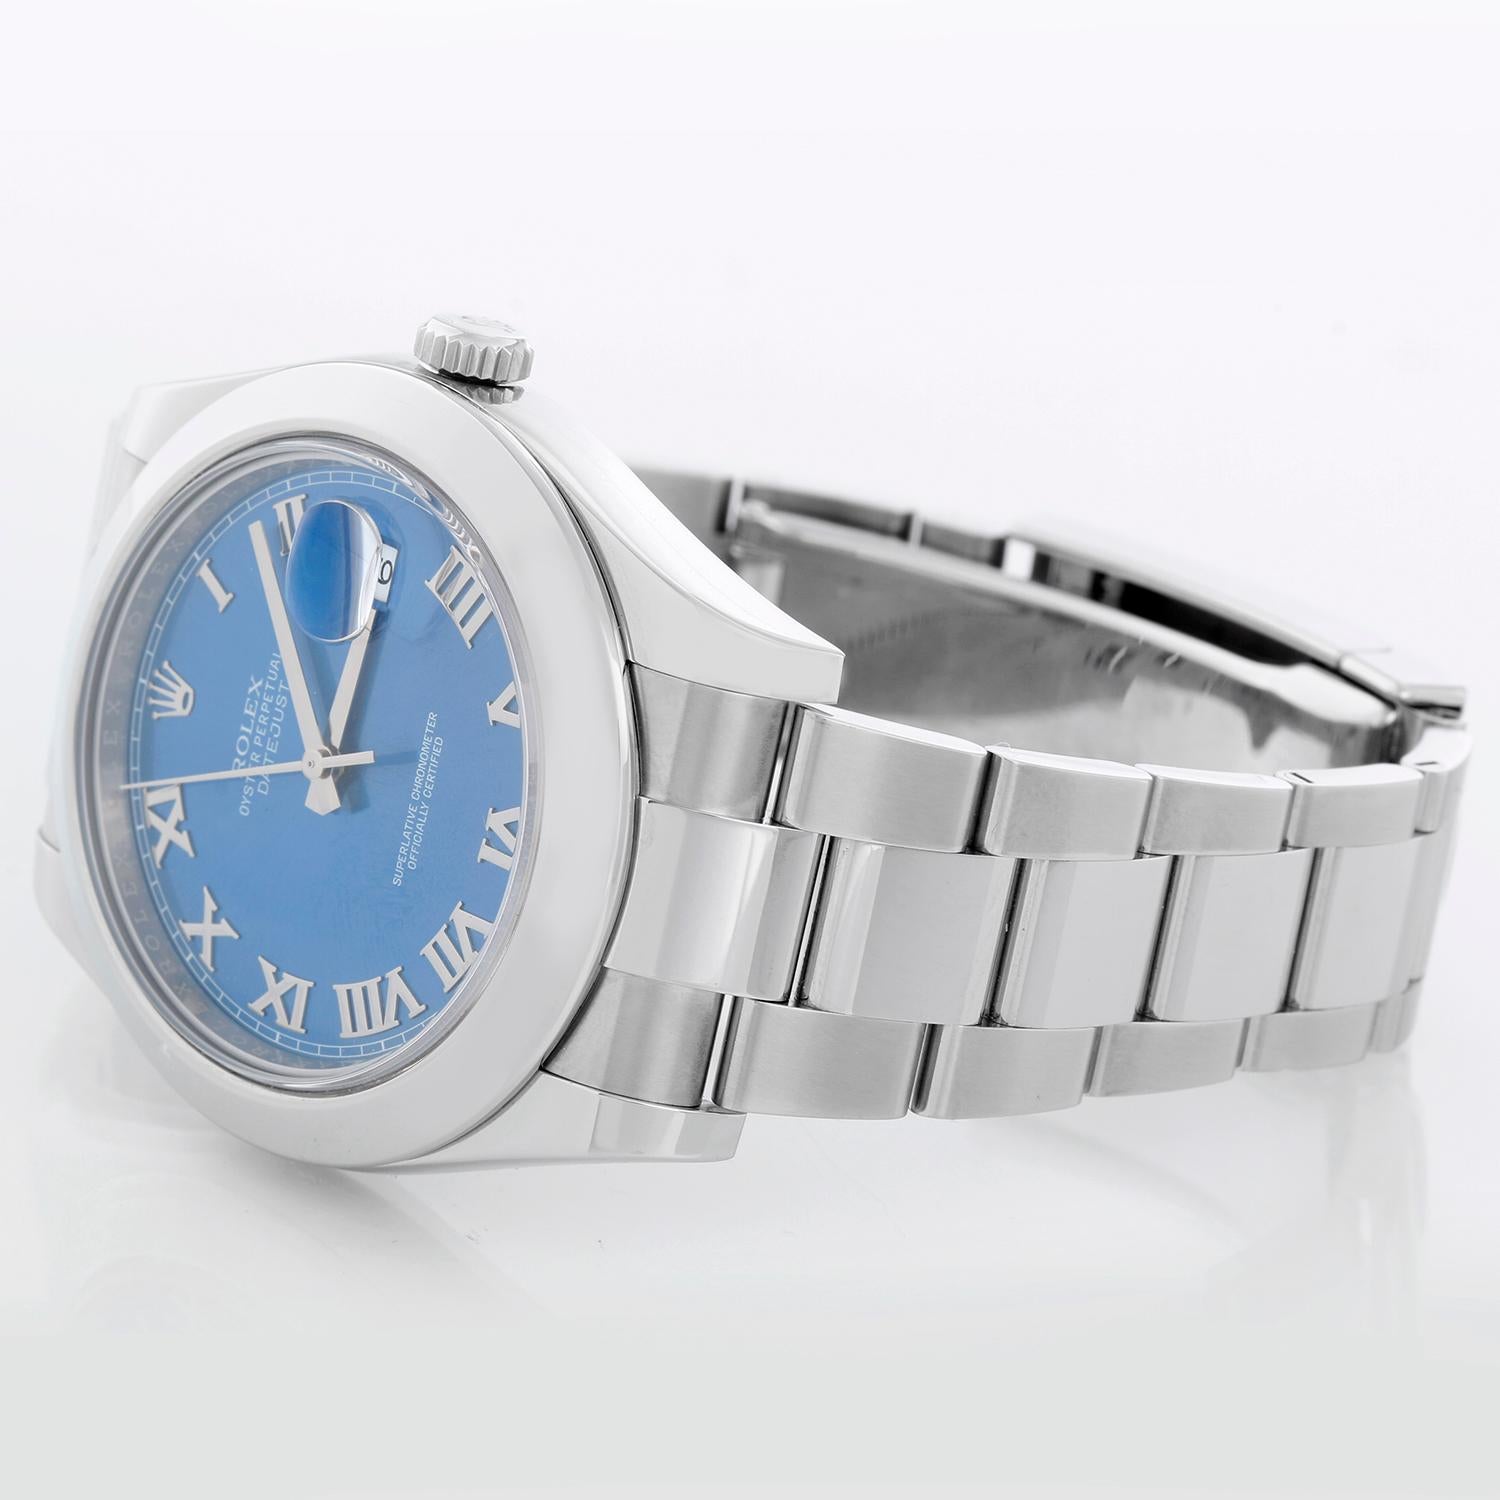 Rolex Datejust II Men's 41mm Stainless Steel Watch  Blue Dial 116300 - Automatic winding, sapphire crystal, serial number engraved in bezel. Stainless steel case with smooth domed bezel (41mm diameter). Blue dial with stick hour markers. Stainless